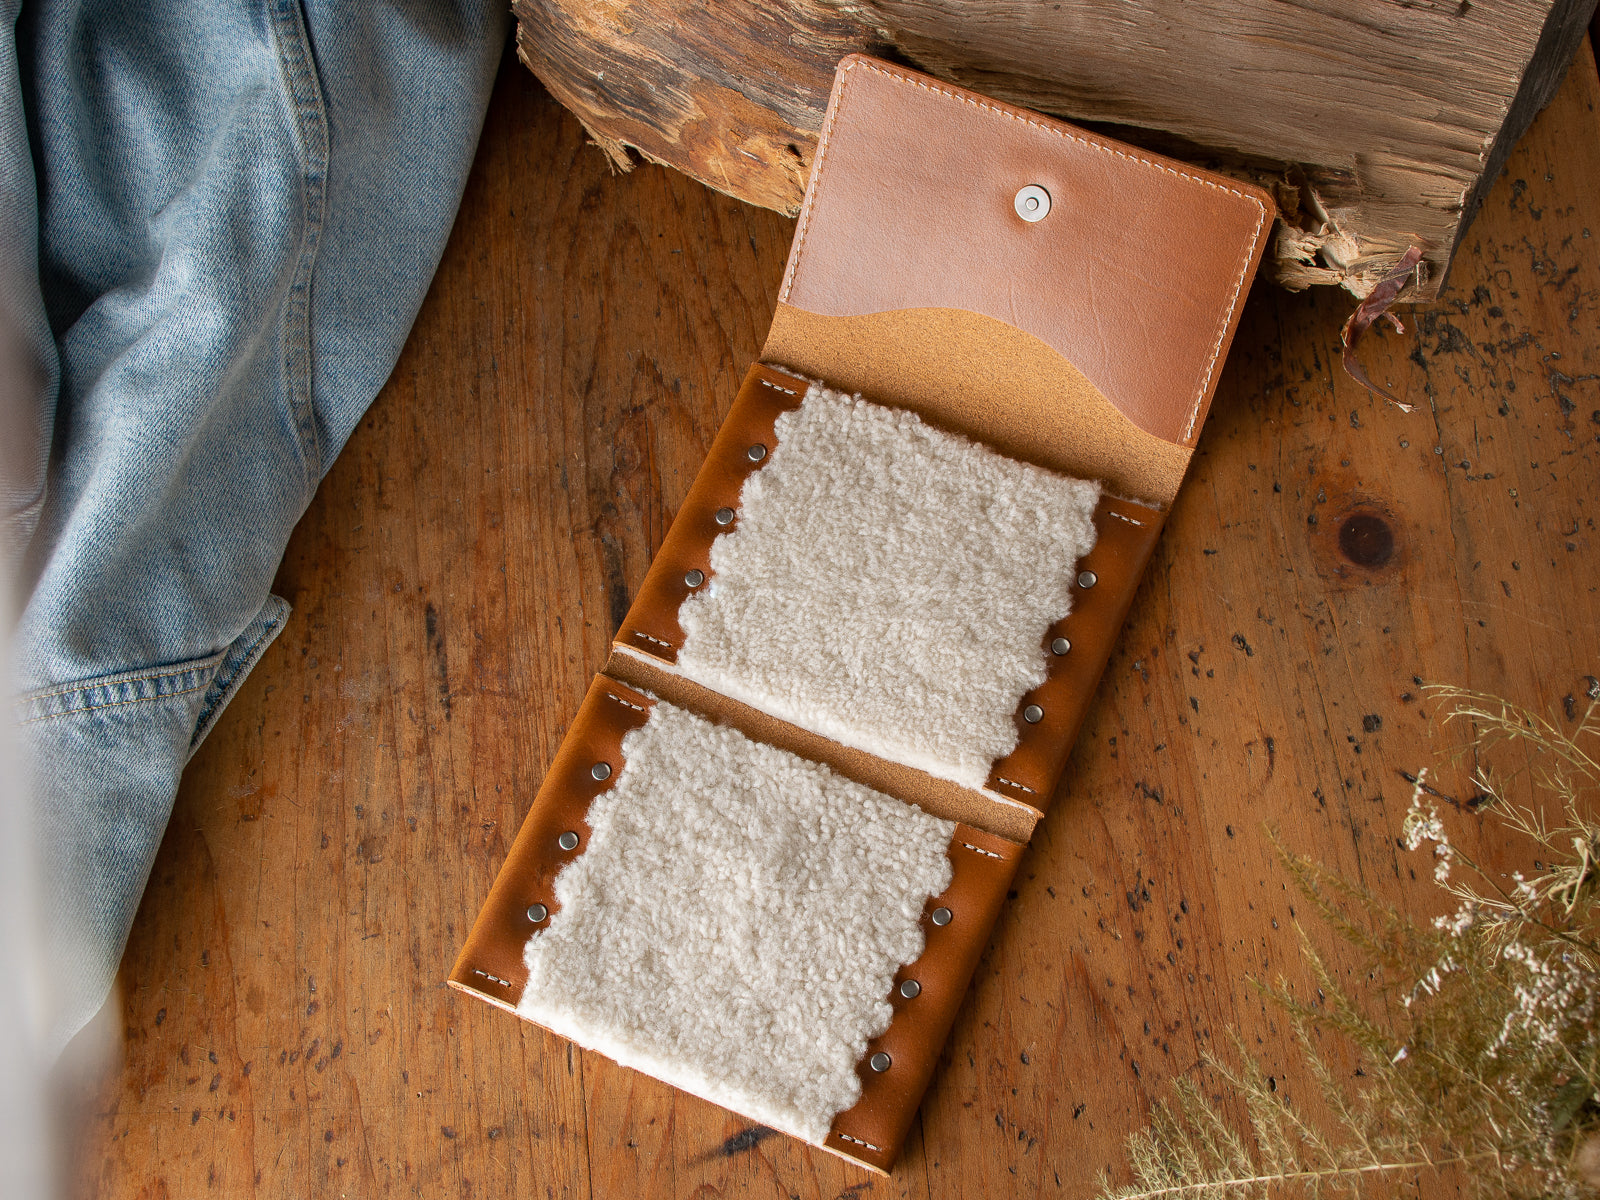 A tan fly fishing wallet sitting on a wooden table.